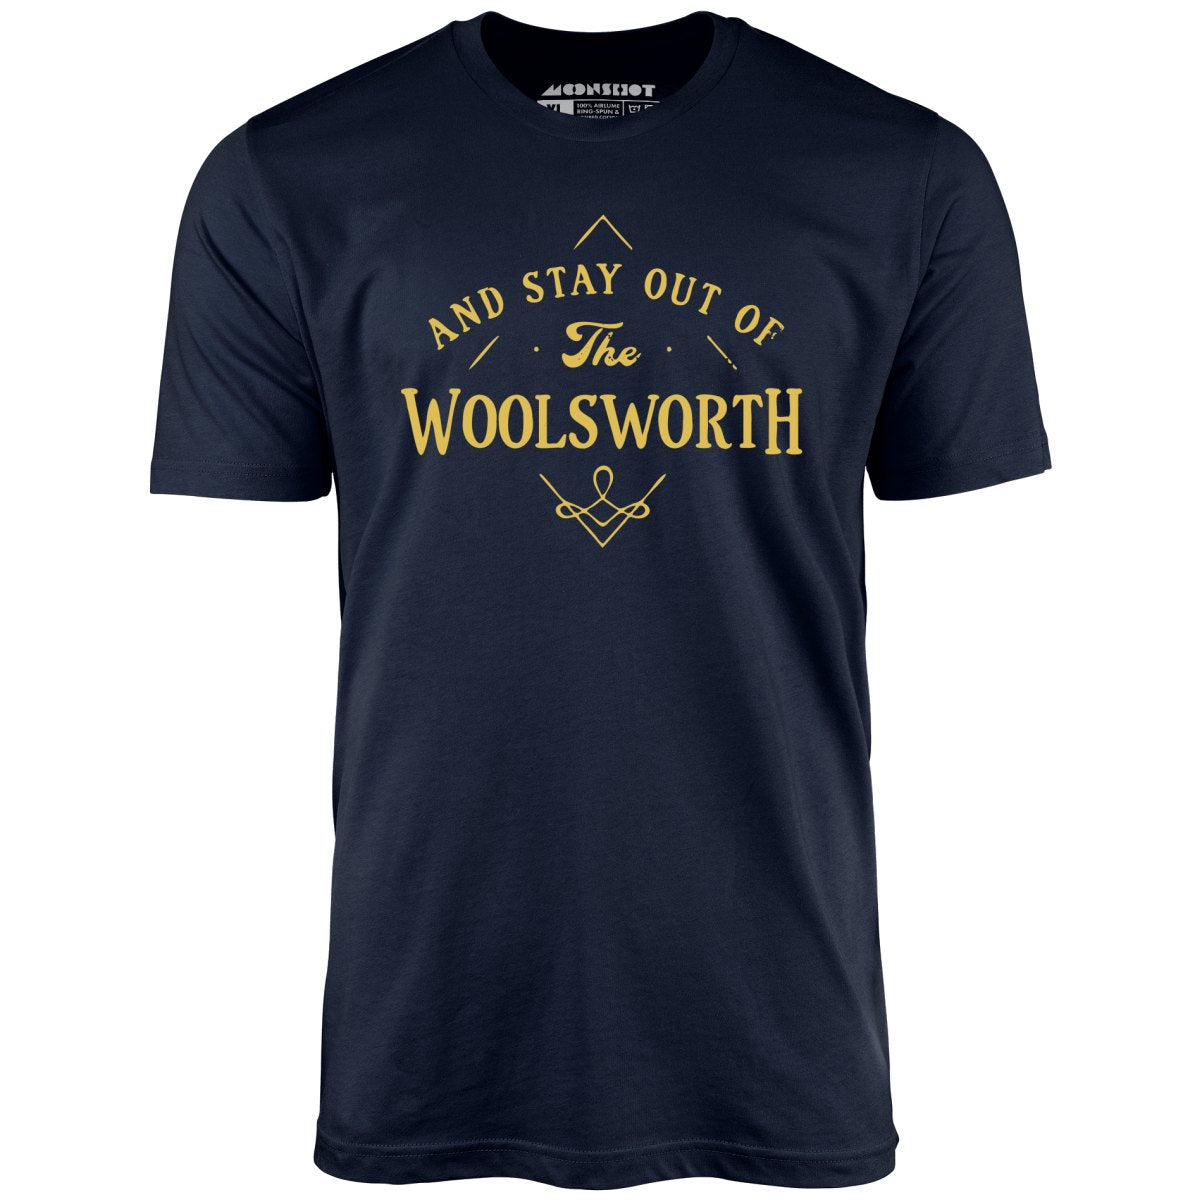 And Stay Out of The Woolsworth - Unisex T-Shirt